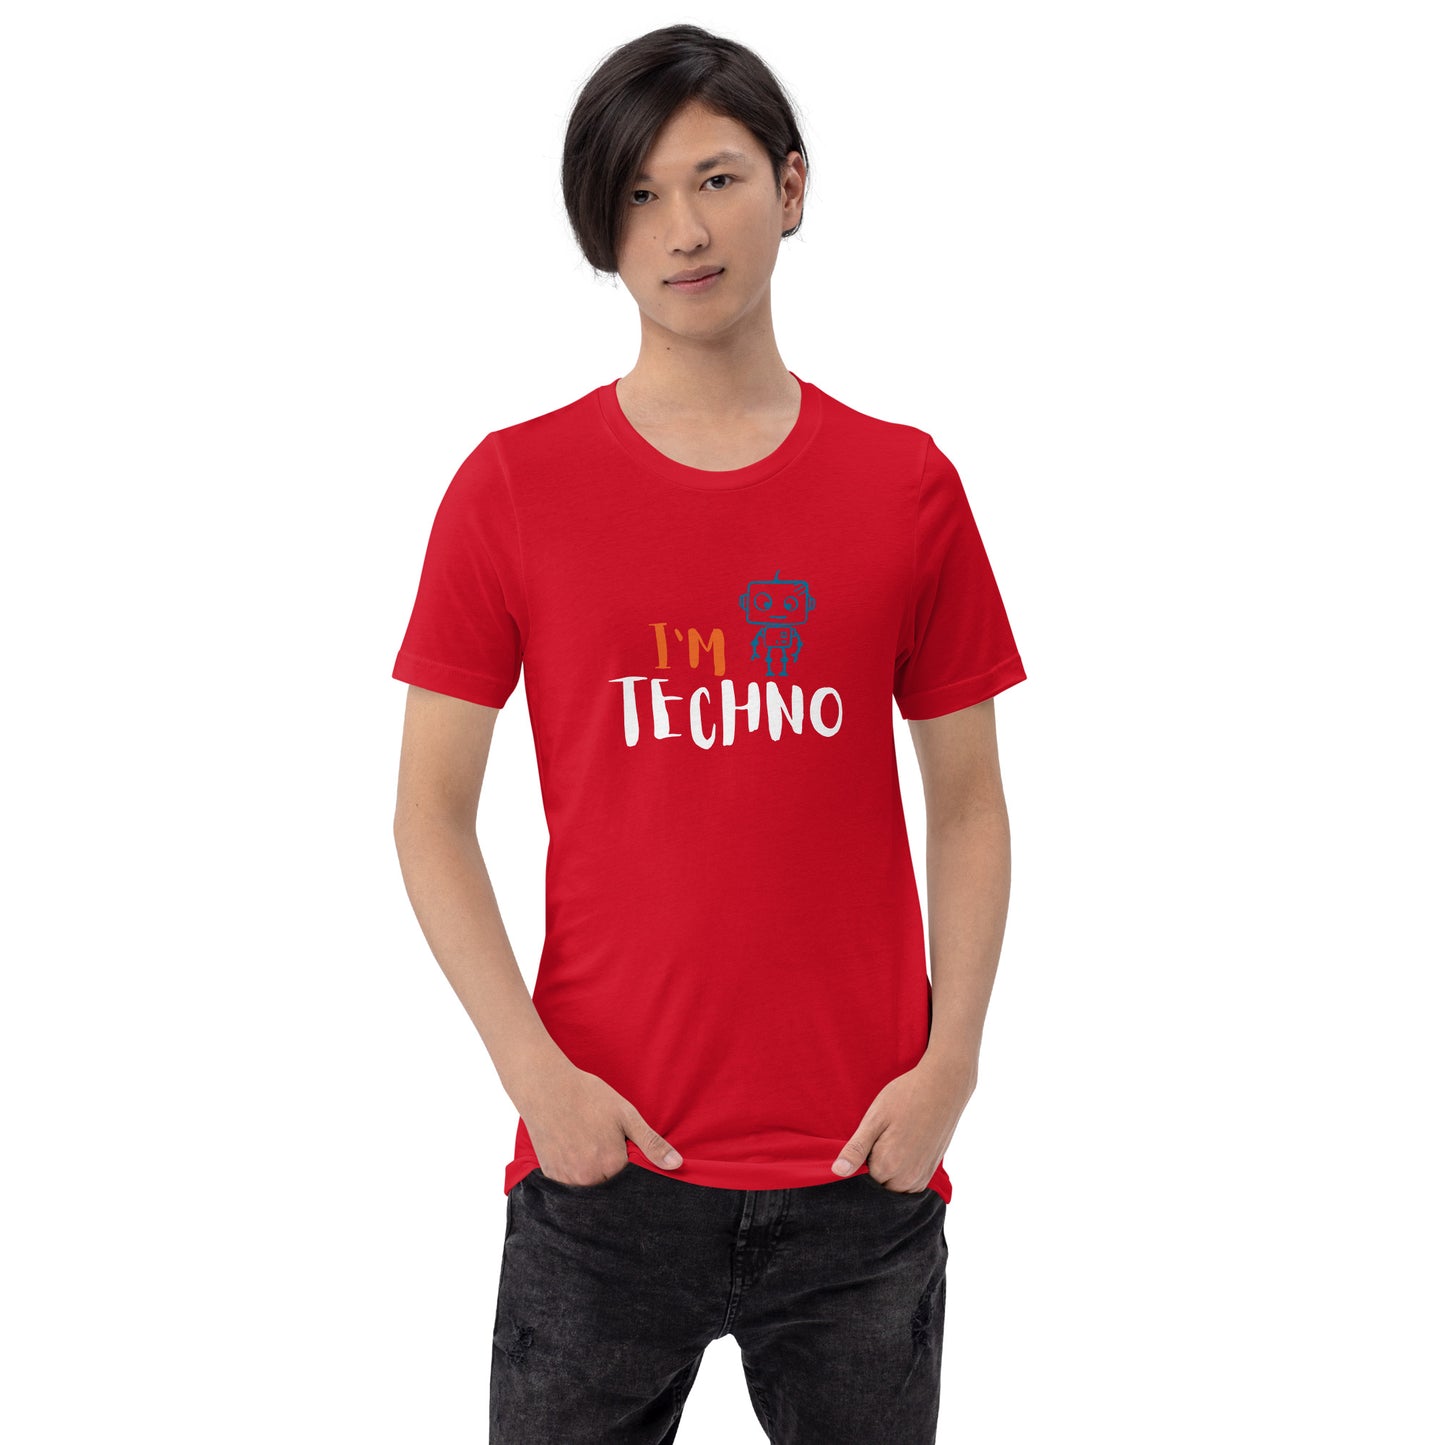 I'M TECHNO T-Shirt (available in multiple colors)